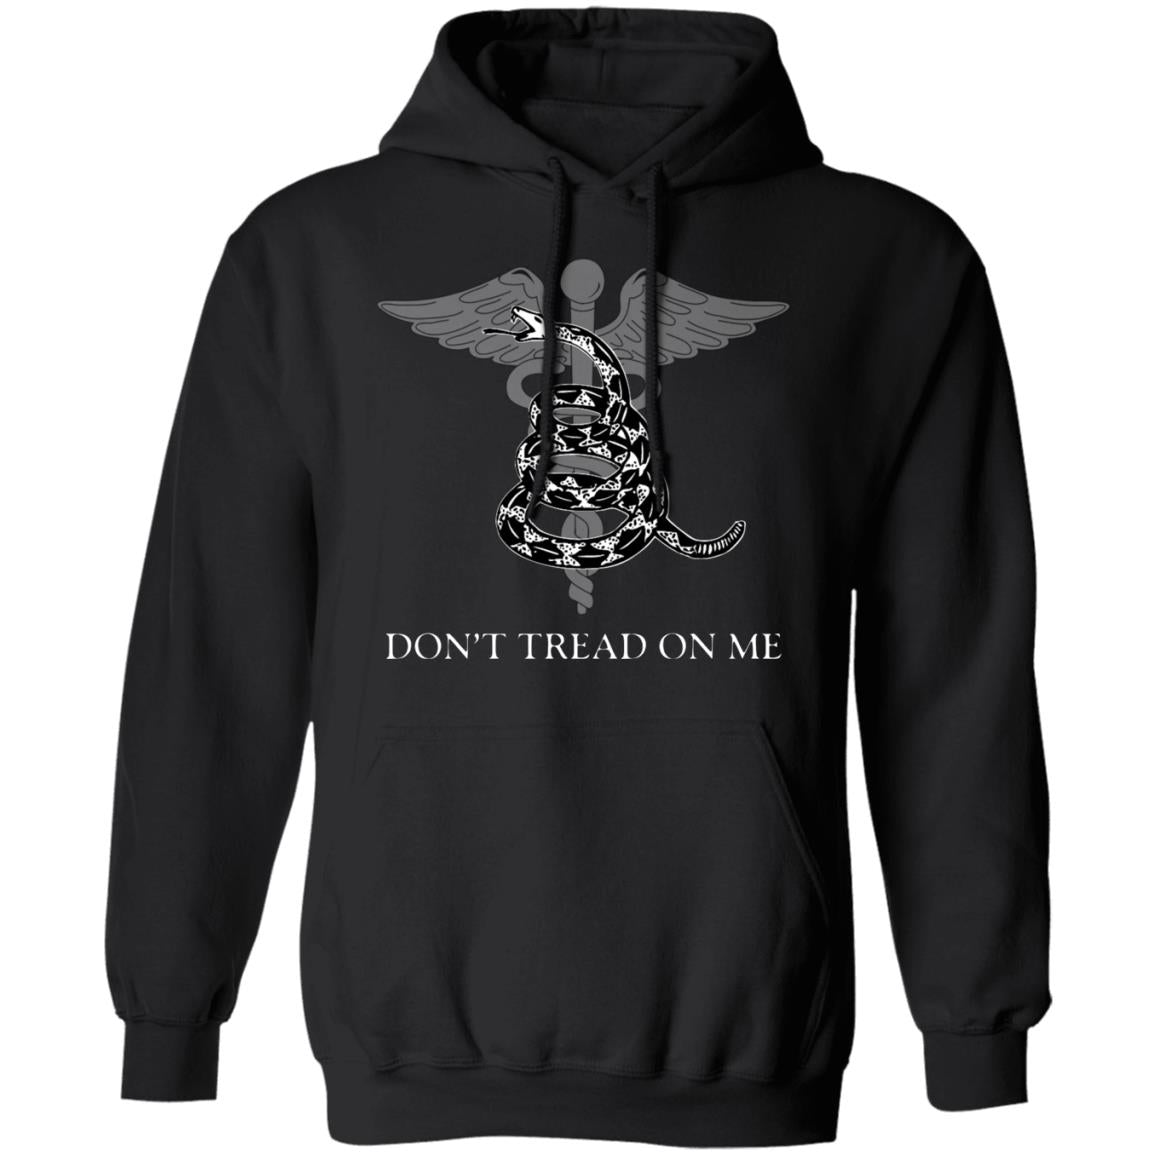 Medical Freedom Pullover Hoodie - Mercantile Mountain